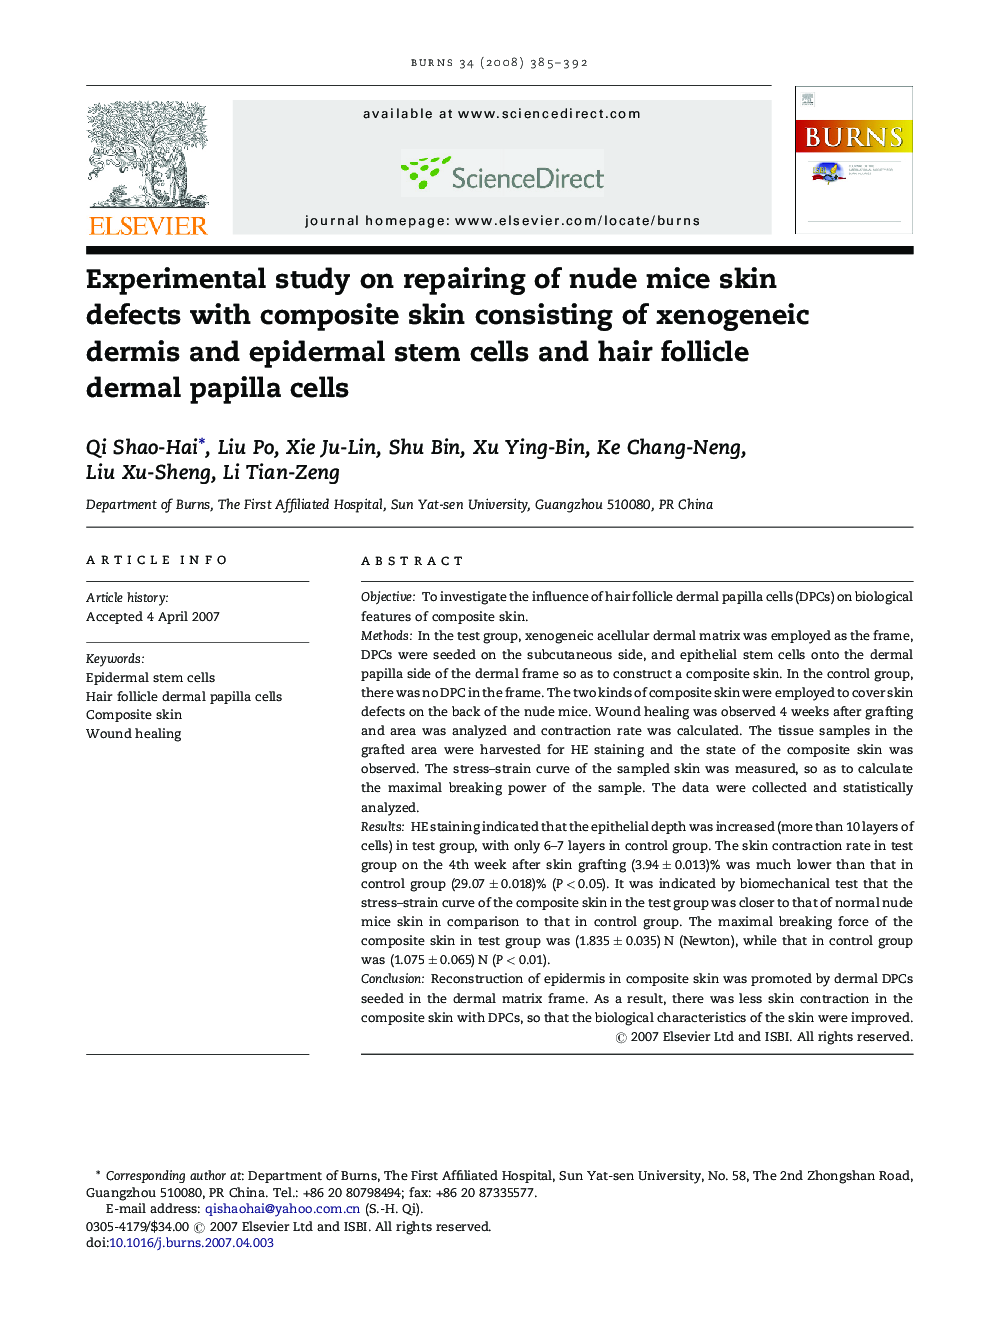 Experimental study on repairing of nude mice skin defects with composite skin consisting of xenogeneic dermis and epidermal stem cells and hair follicle dermal papilla cells